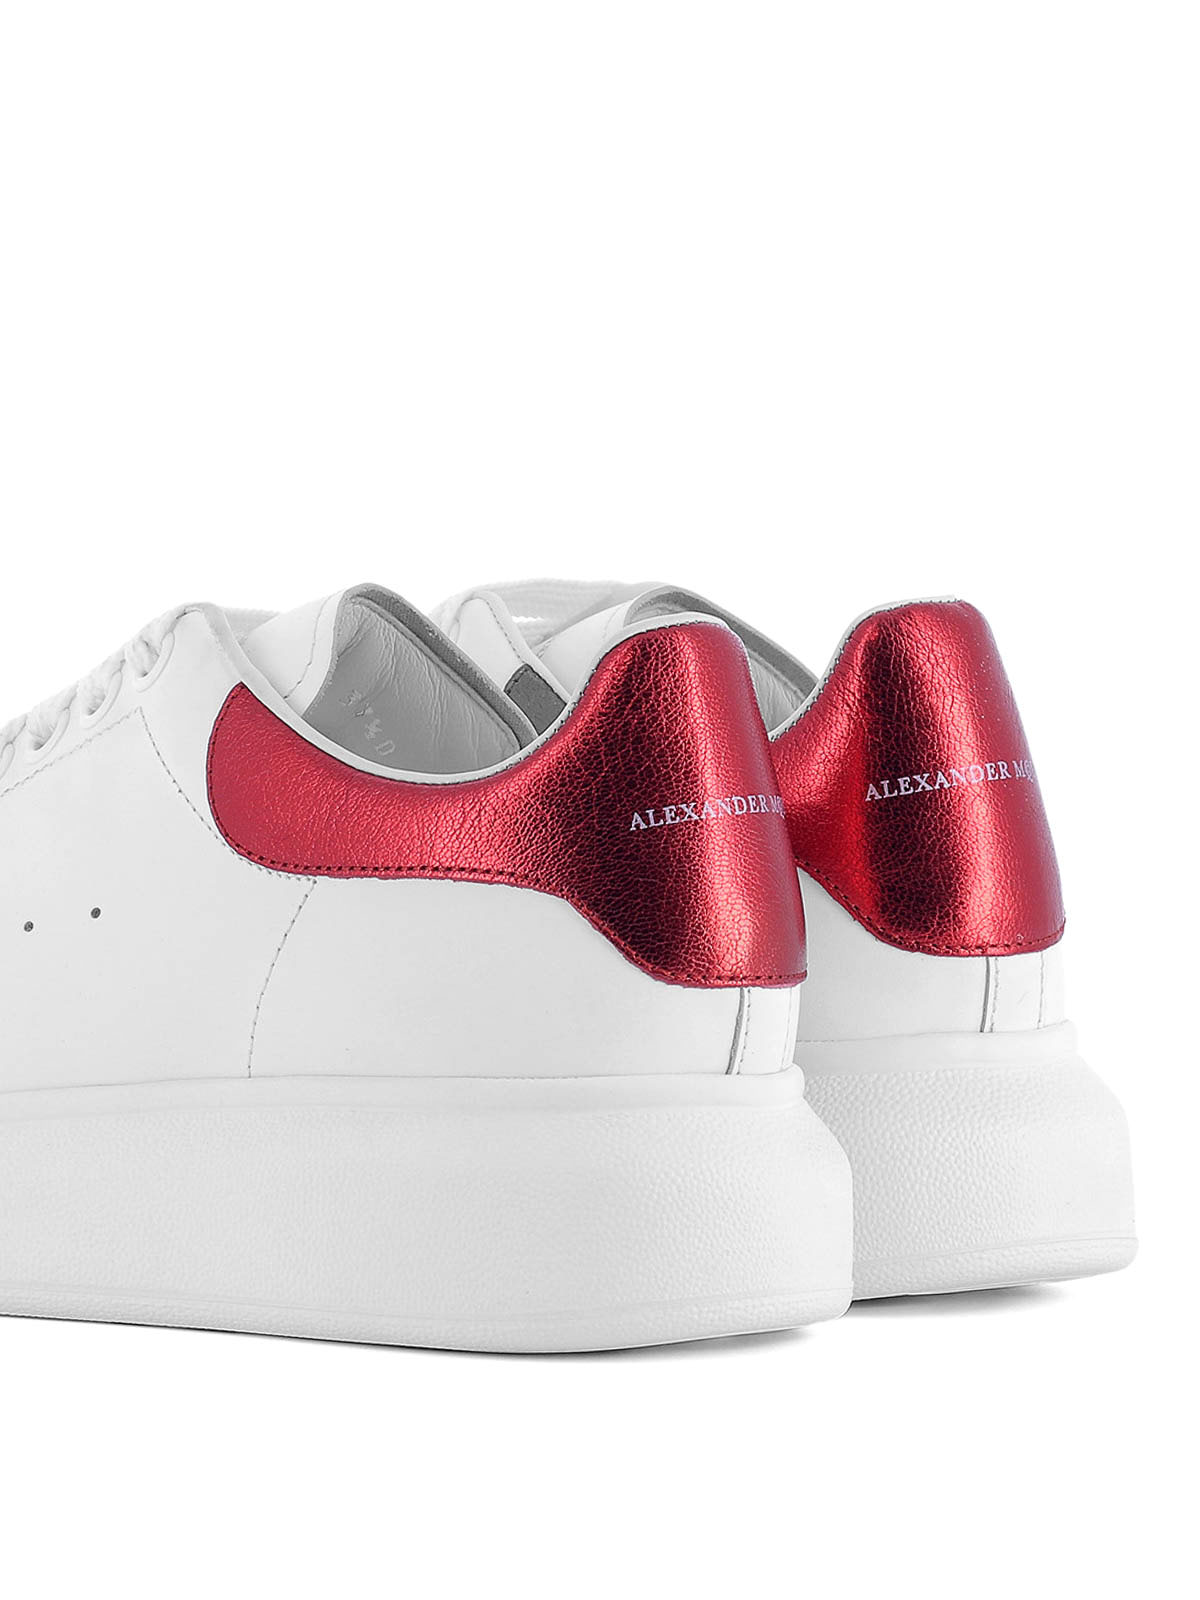 alexander mcqueen shoes red outlet 